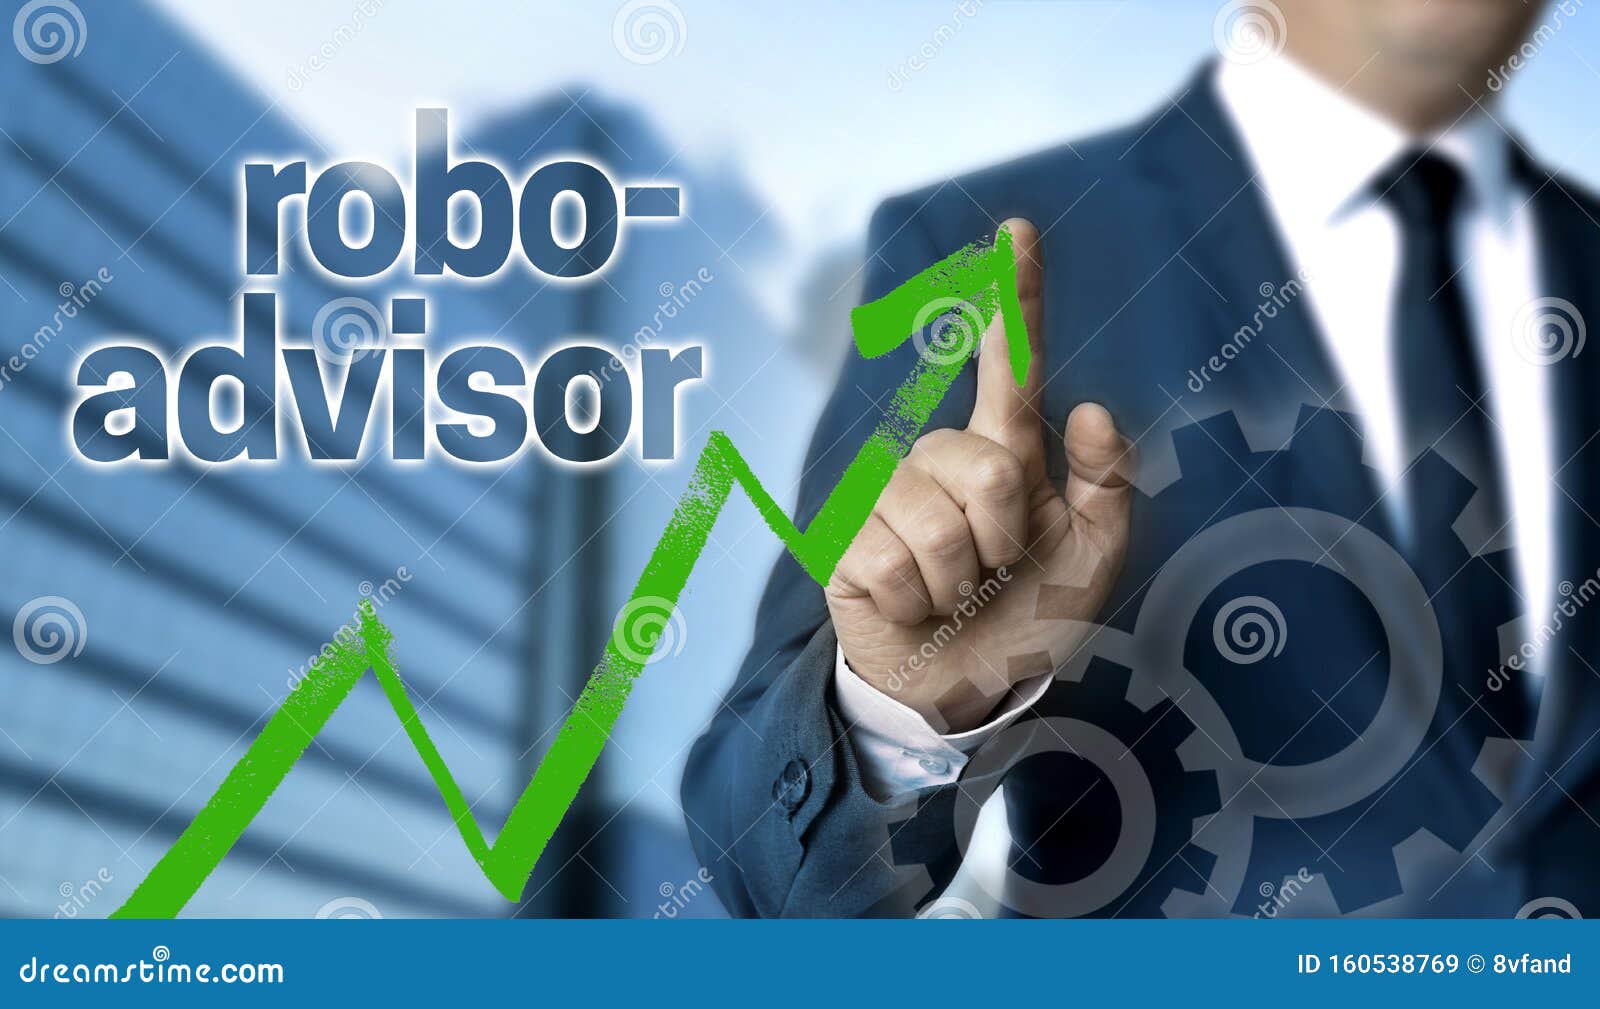 robo advisor concept is shown by businessman